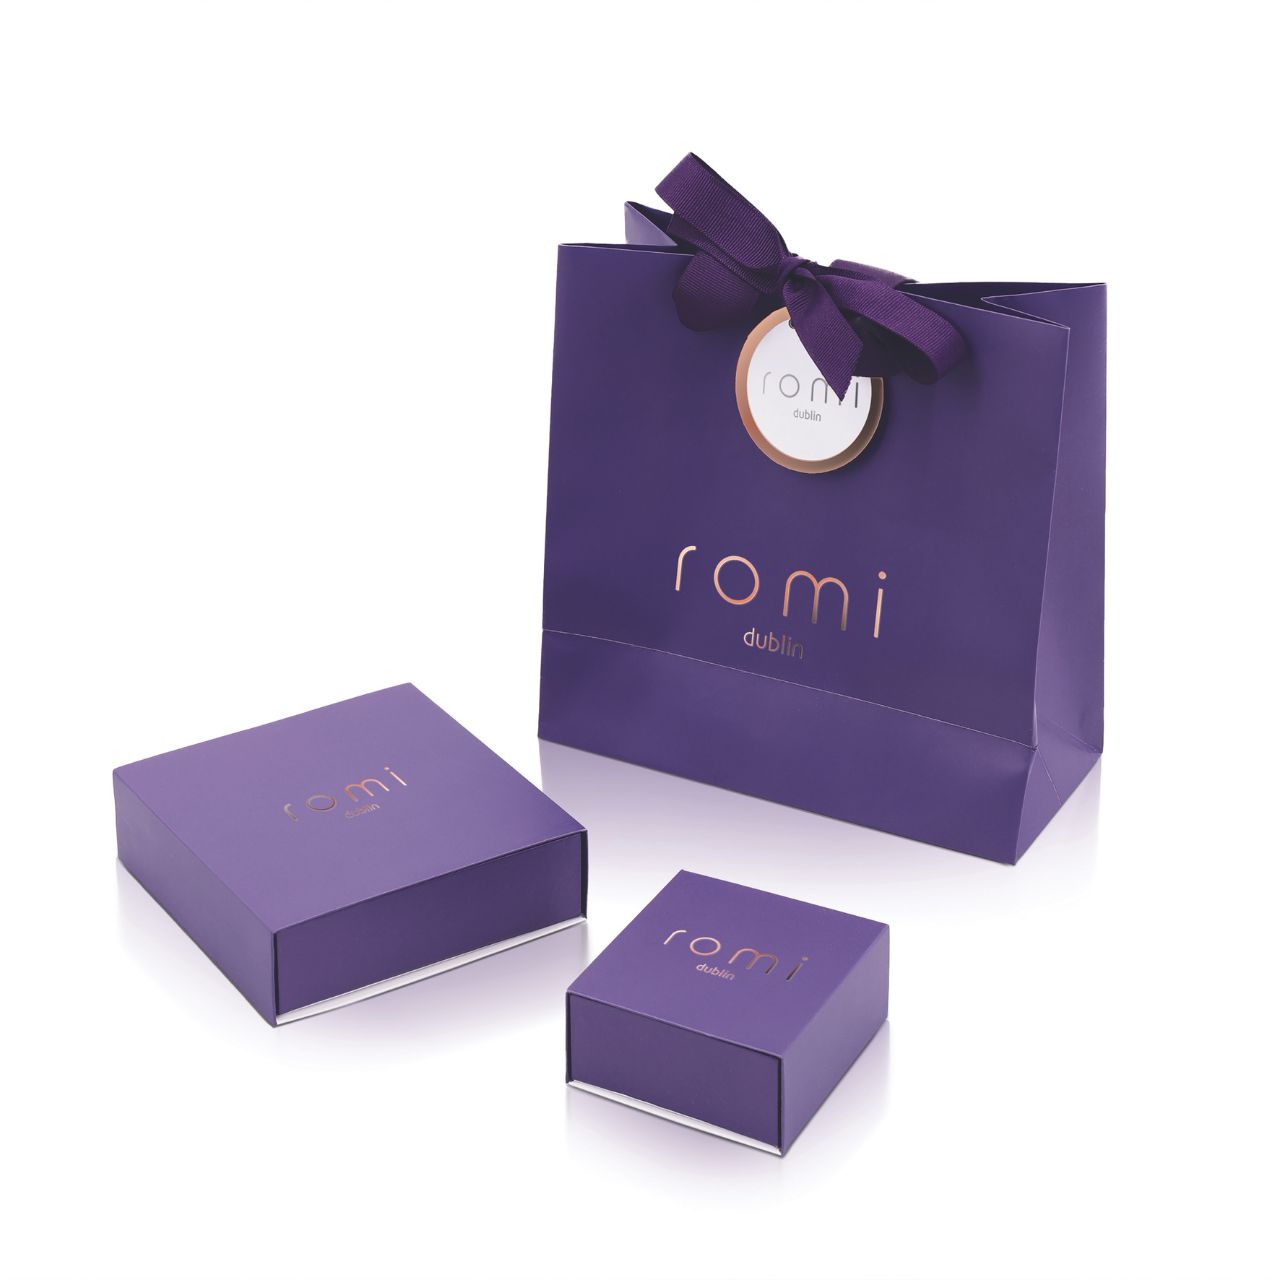 Romi Dublin Silver Chain Bracelet  This easy-to-wear jewellery collection was inspired by daughter Romi who loves to style and accessorise. An outfit isn’t complete until the perfect pieces of jewellery and accessories have been selected to enhance it.